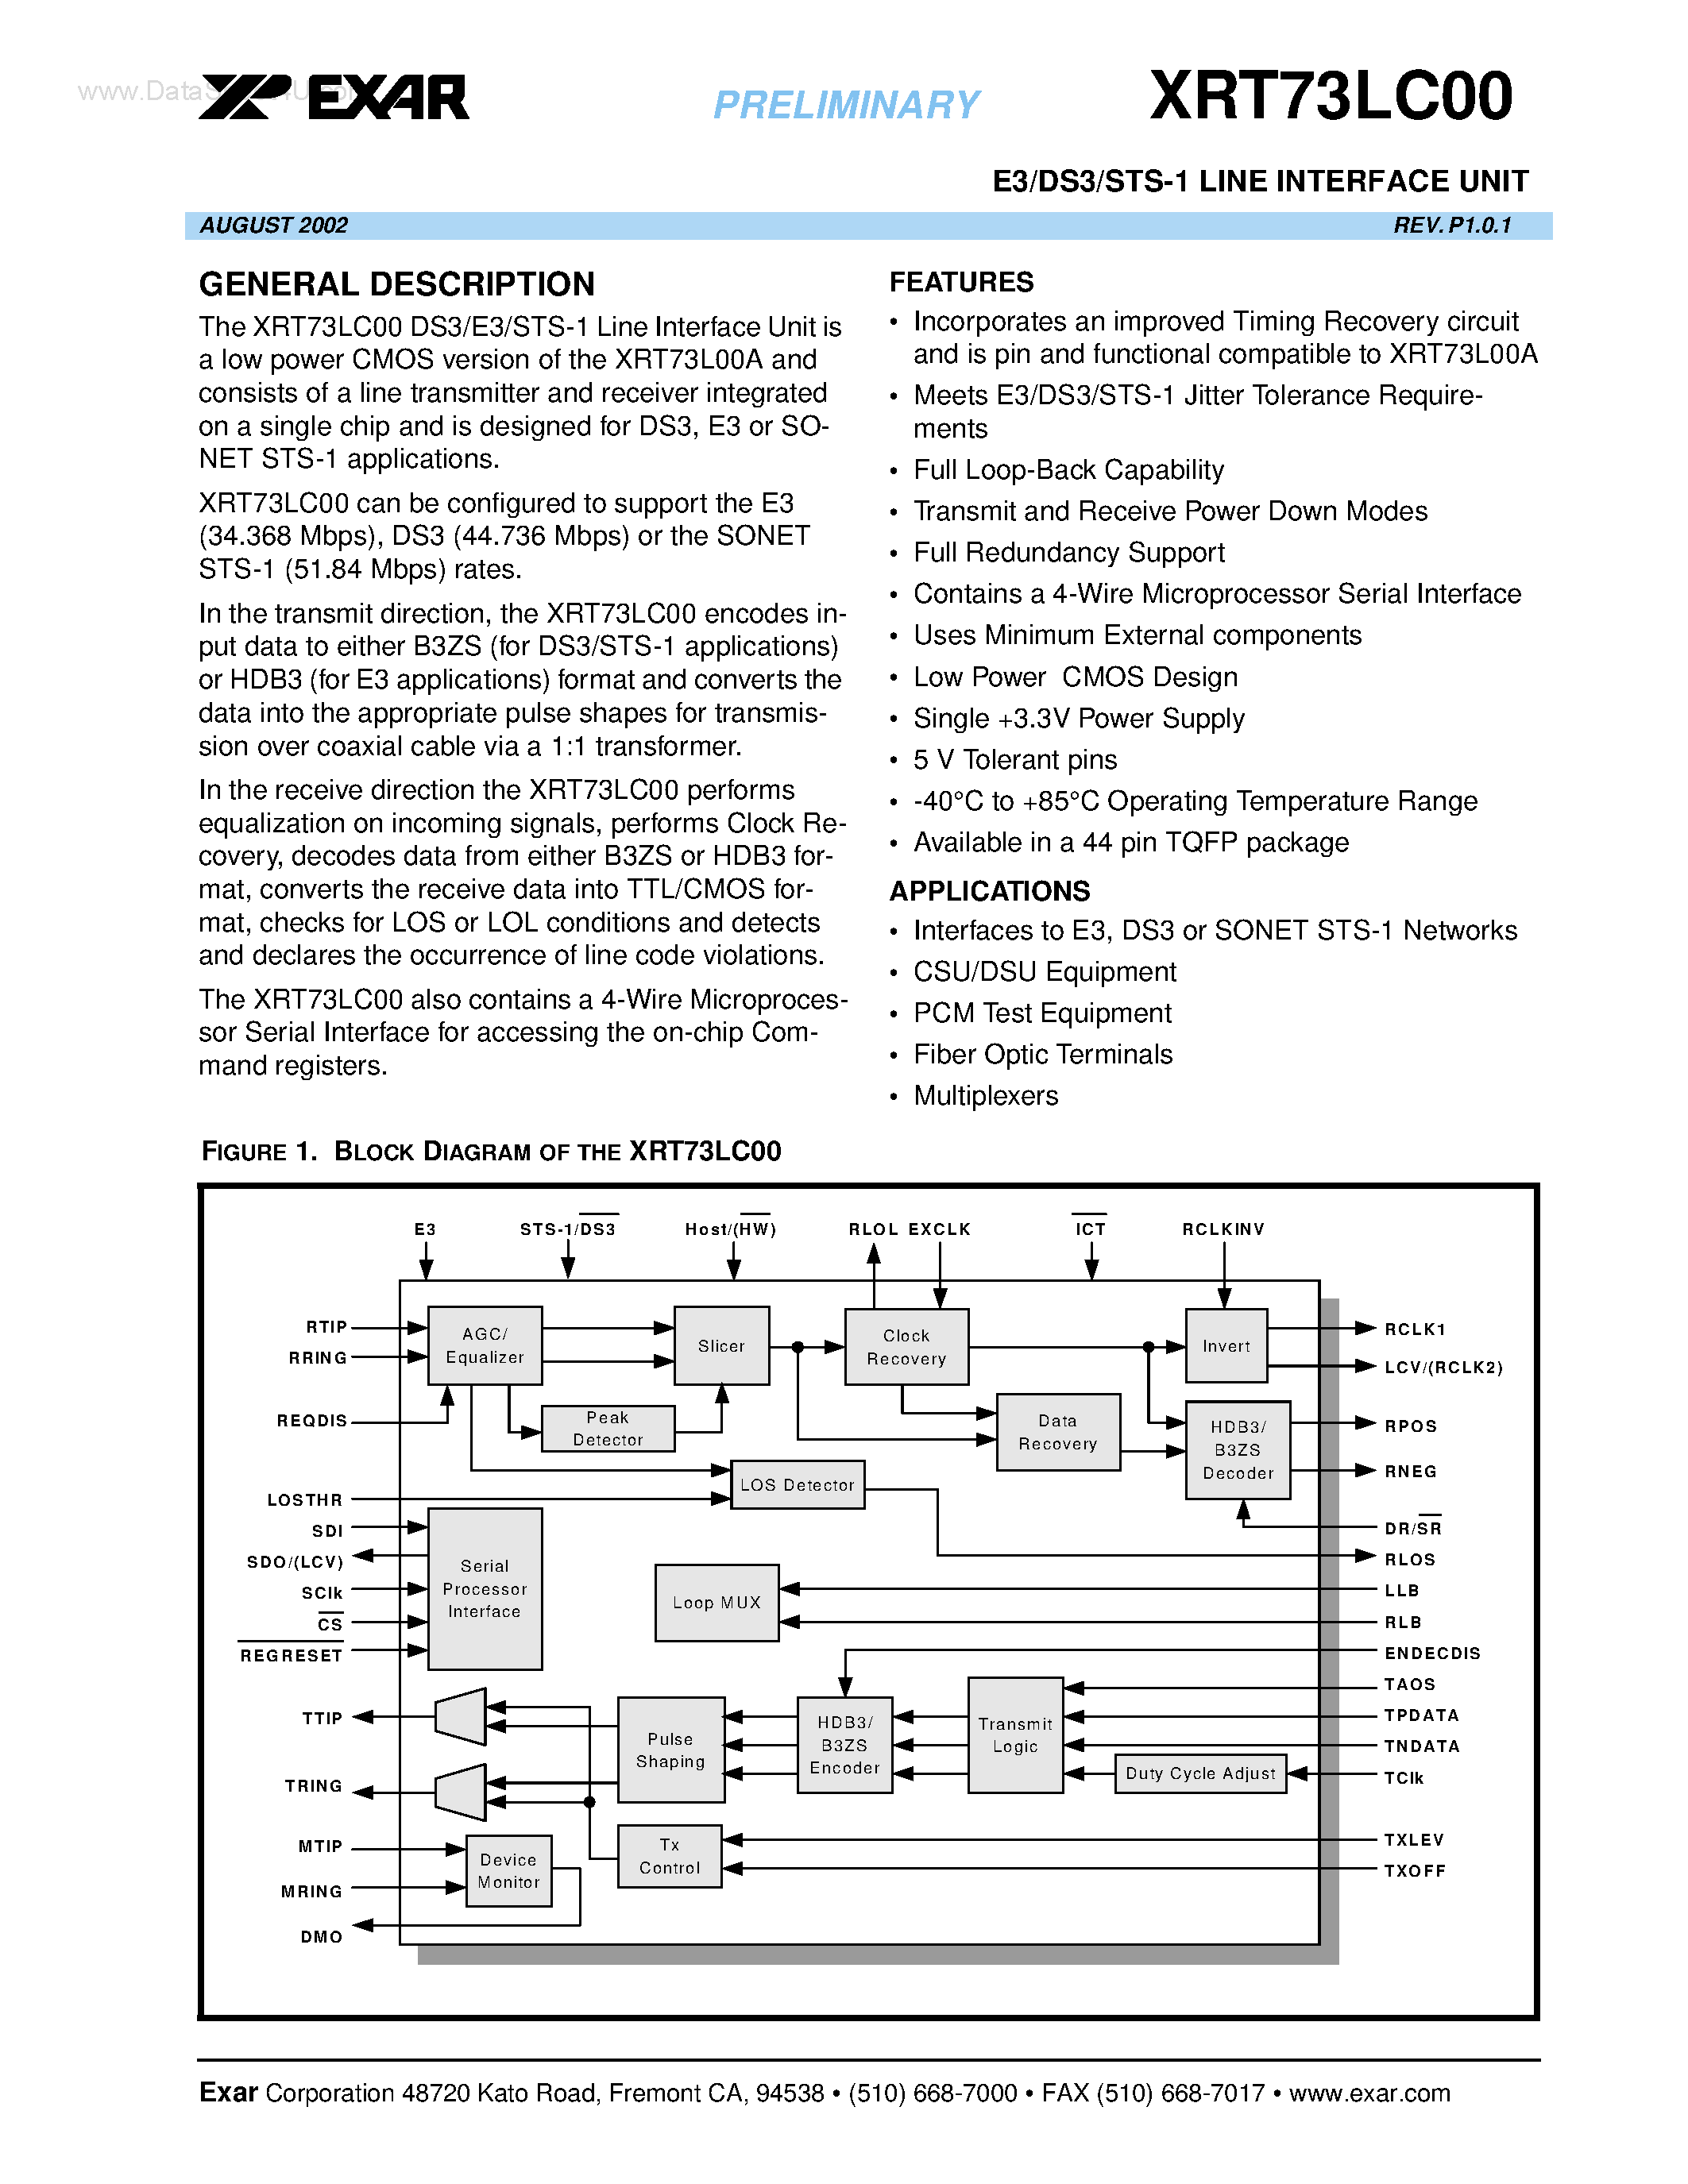 Datasheet XRT73LC00 - E3/DS3/STS-1 LINE INTERFACE UNIT page 1